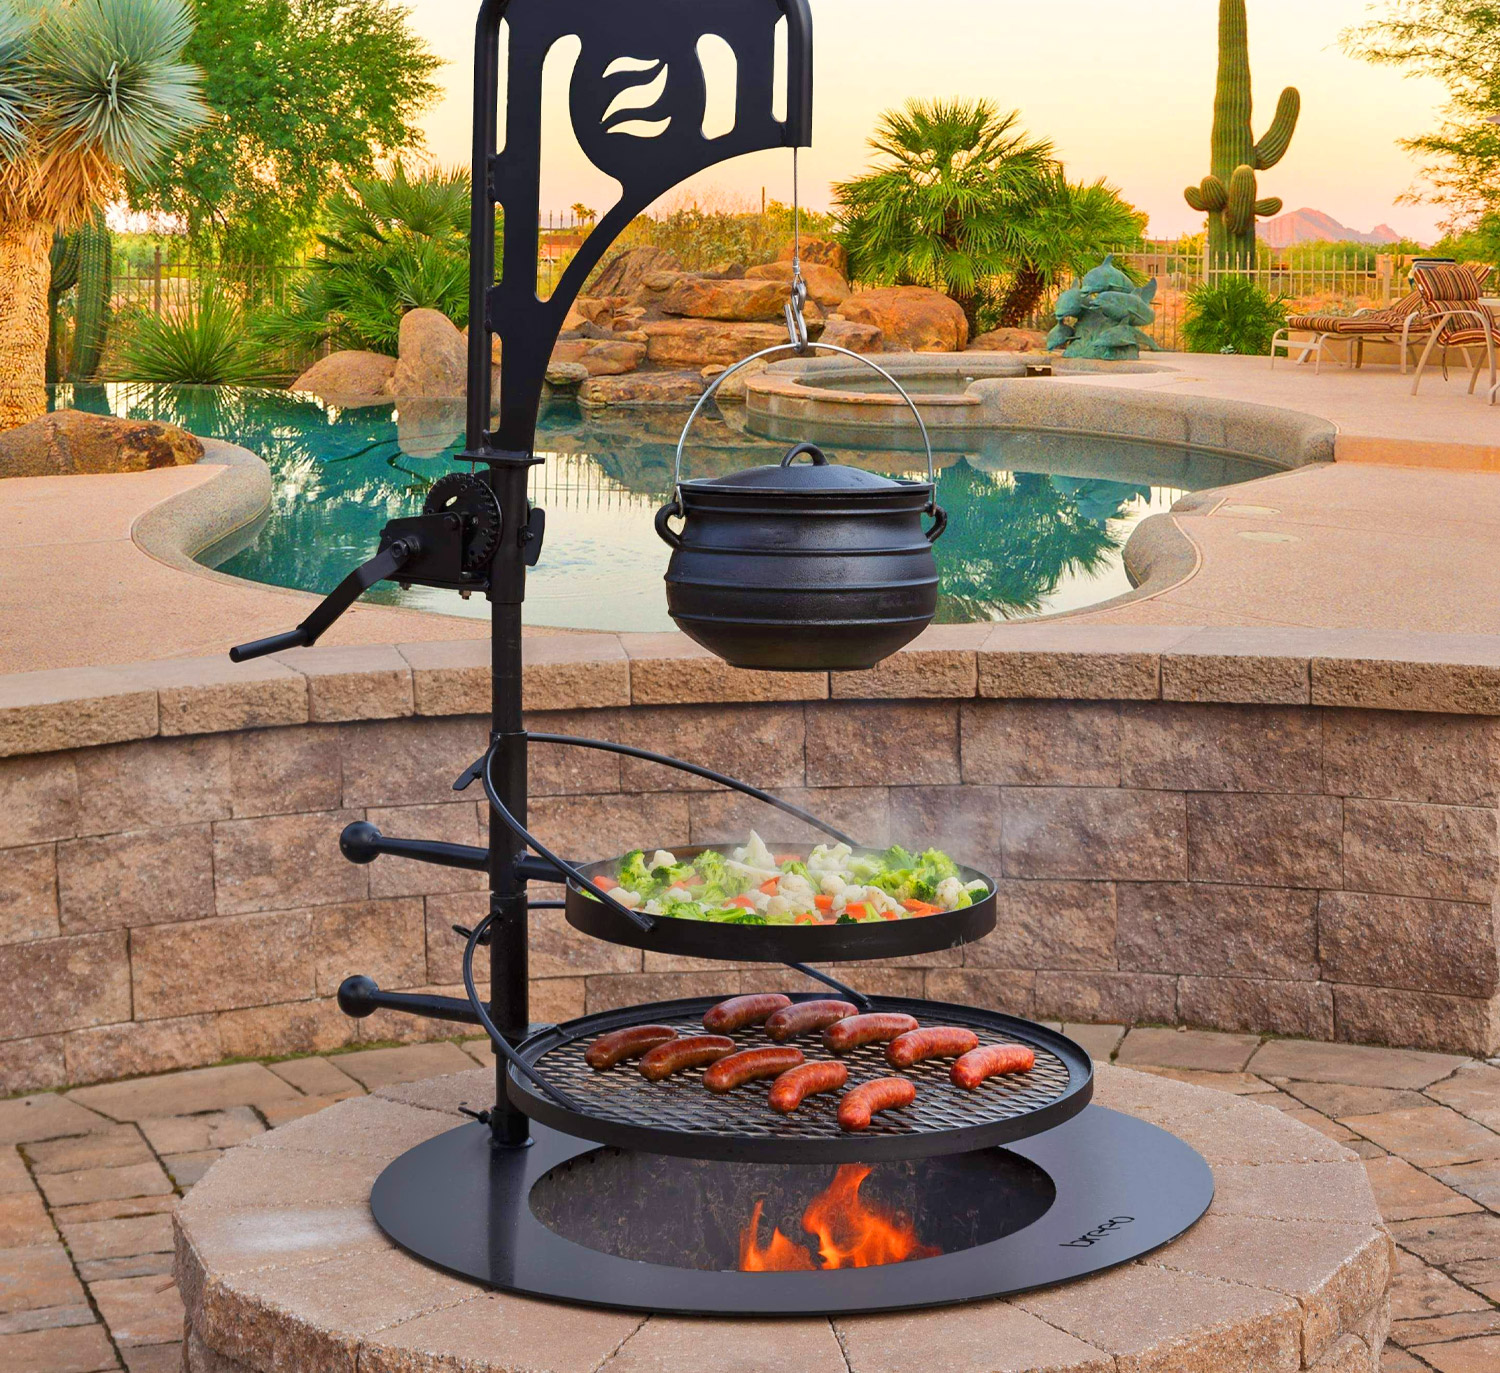 Fire Pit Into A Tiered Cooking Machine, Fire Pit Grill Table Combo